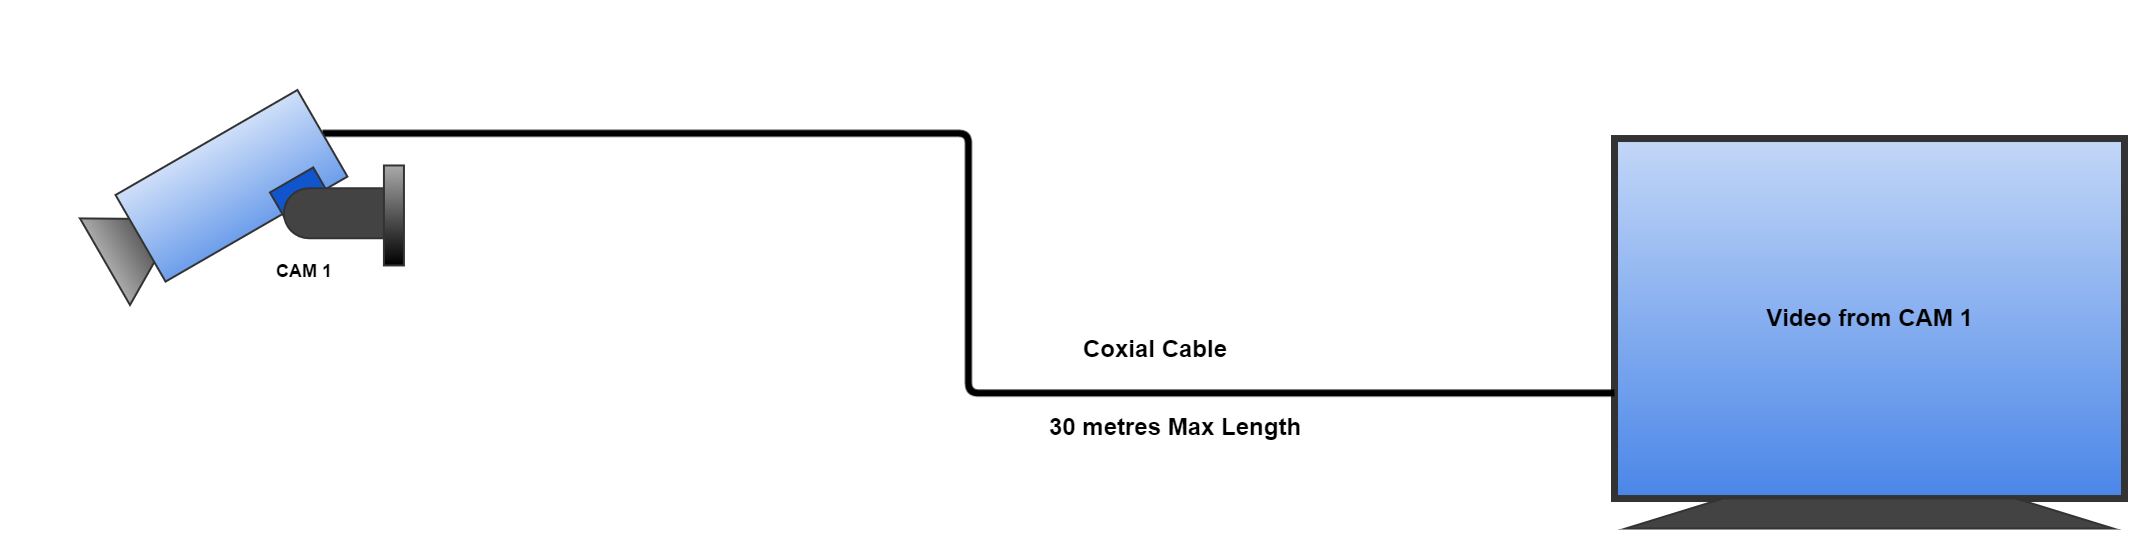 Simple Analogue System with direct coaxial cable